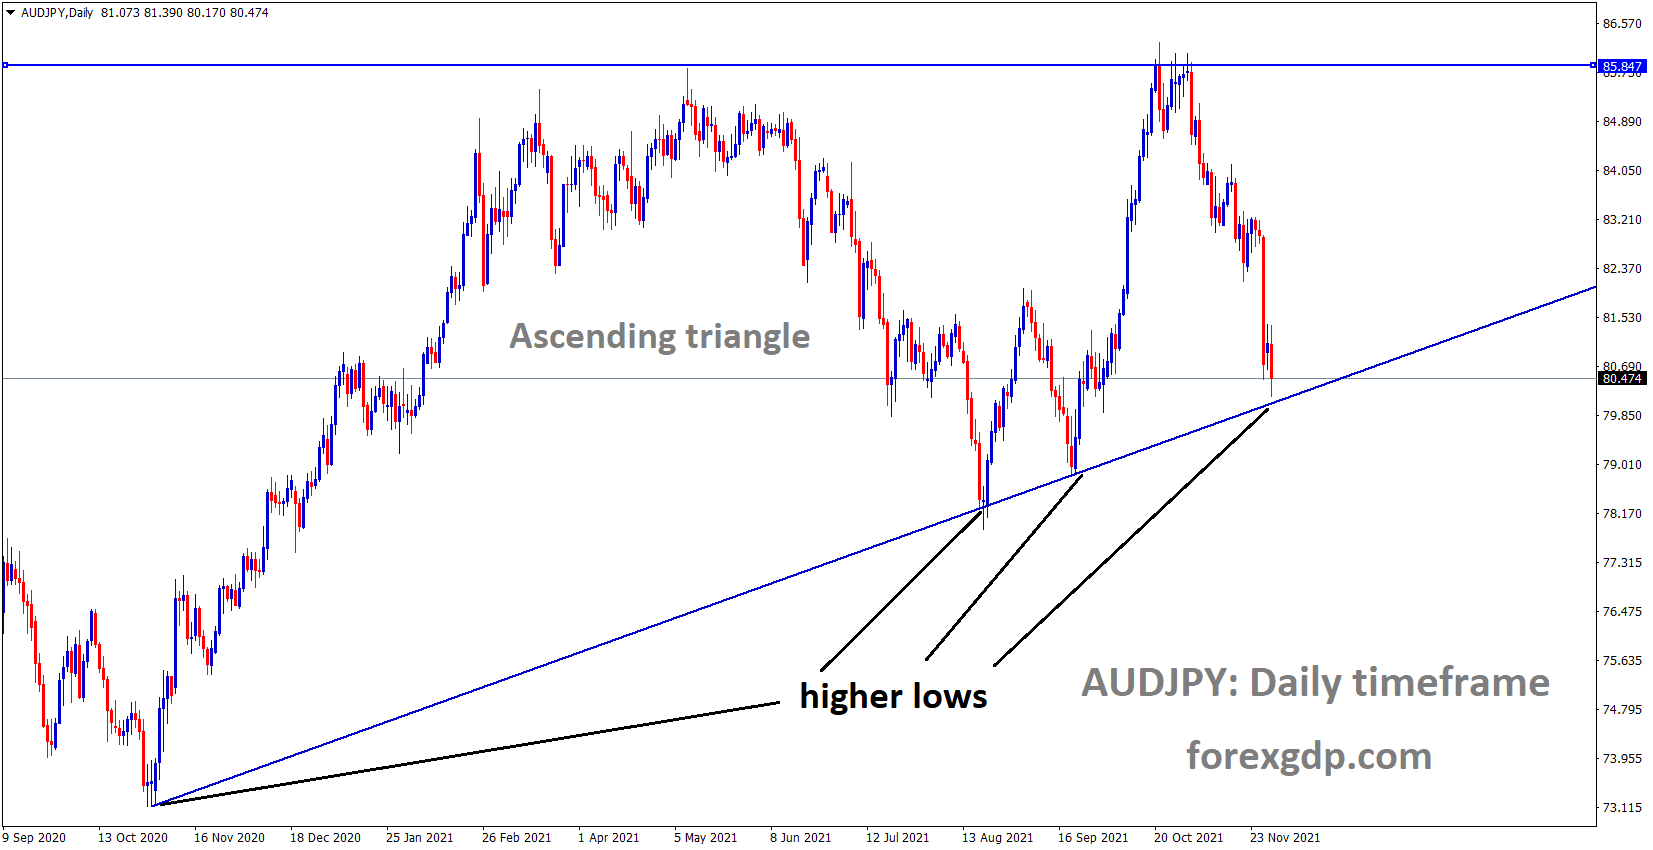 AUDJPY is moving in an ascending triangle pattern and the market reached the higher low area of the ascending channel